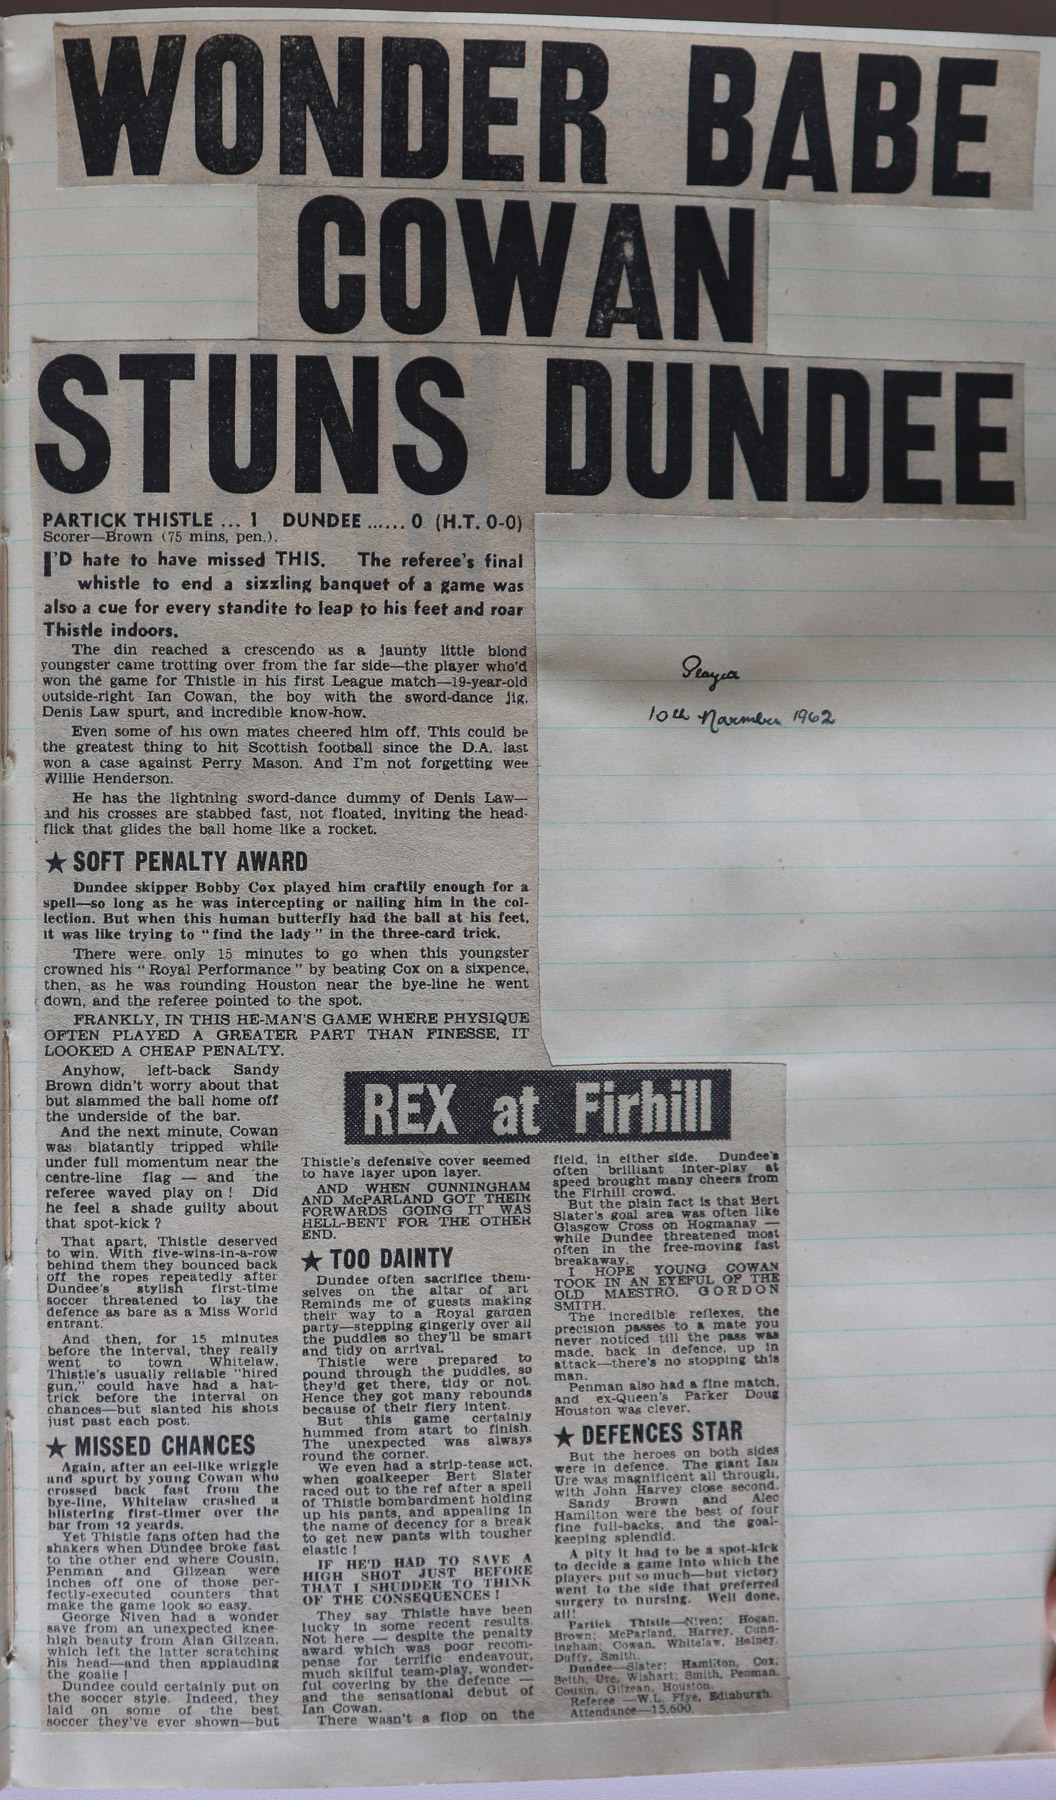 1962-11-10_Partick_Thistle_1-0_Dundee_L1_1